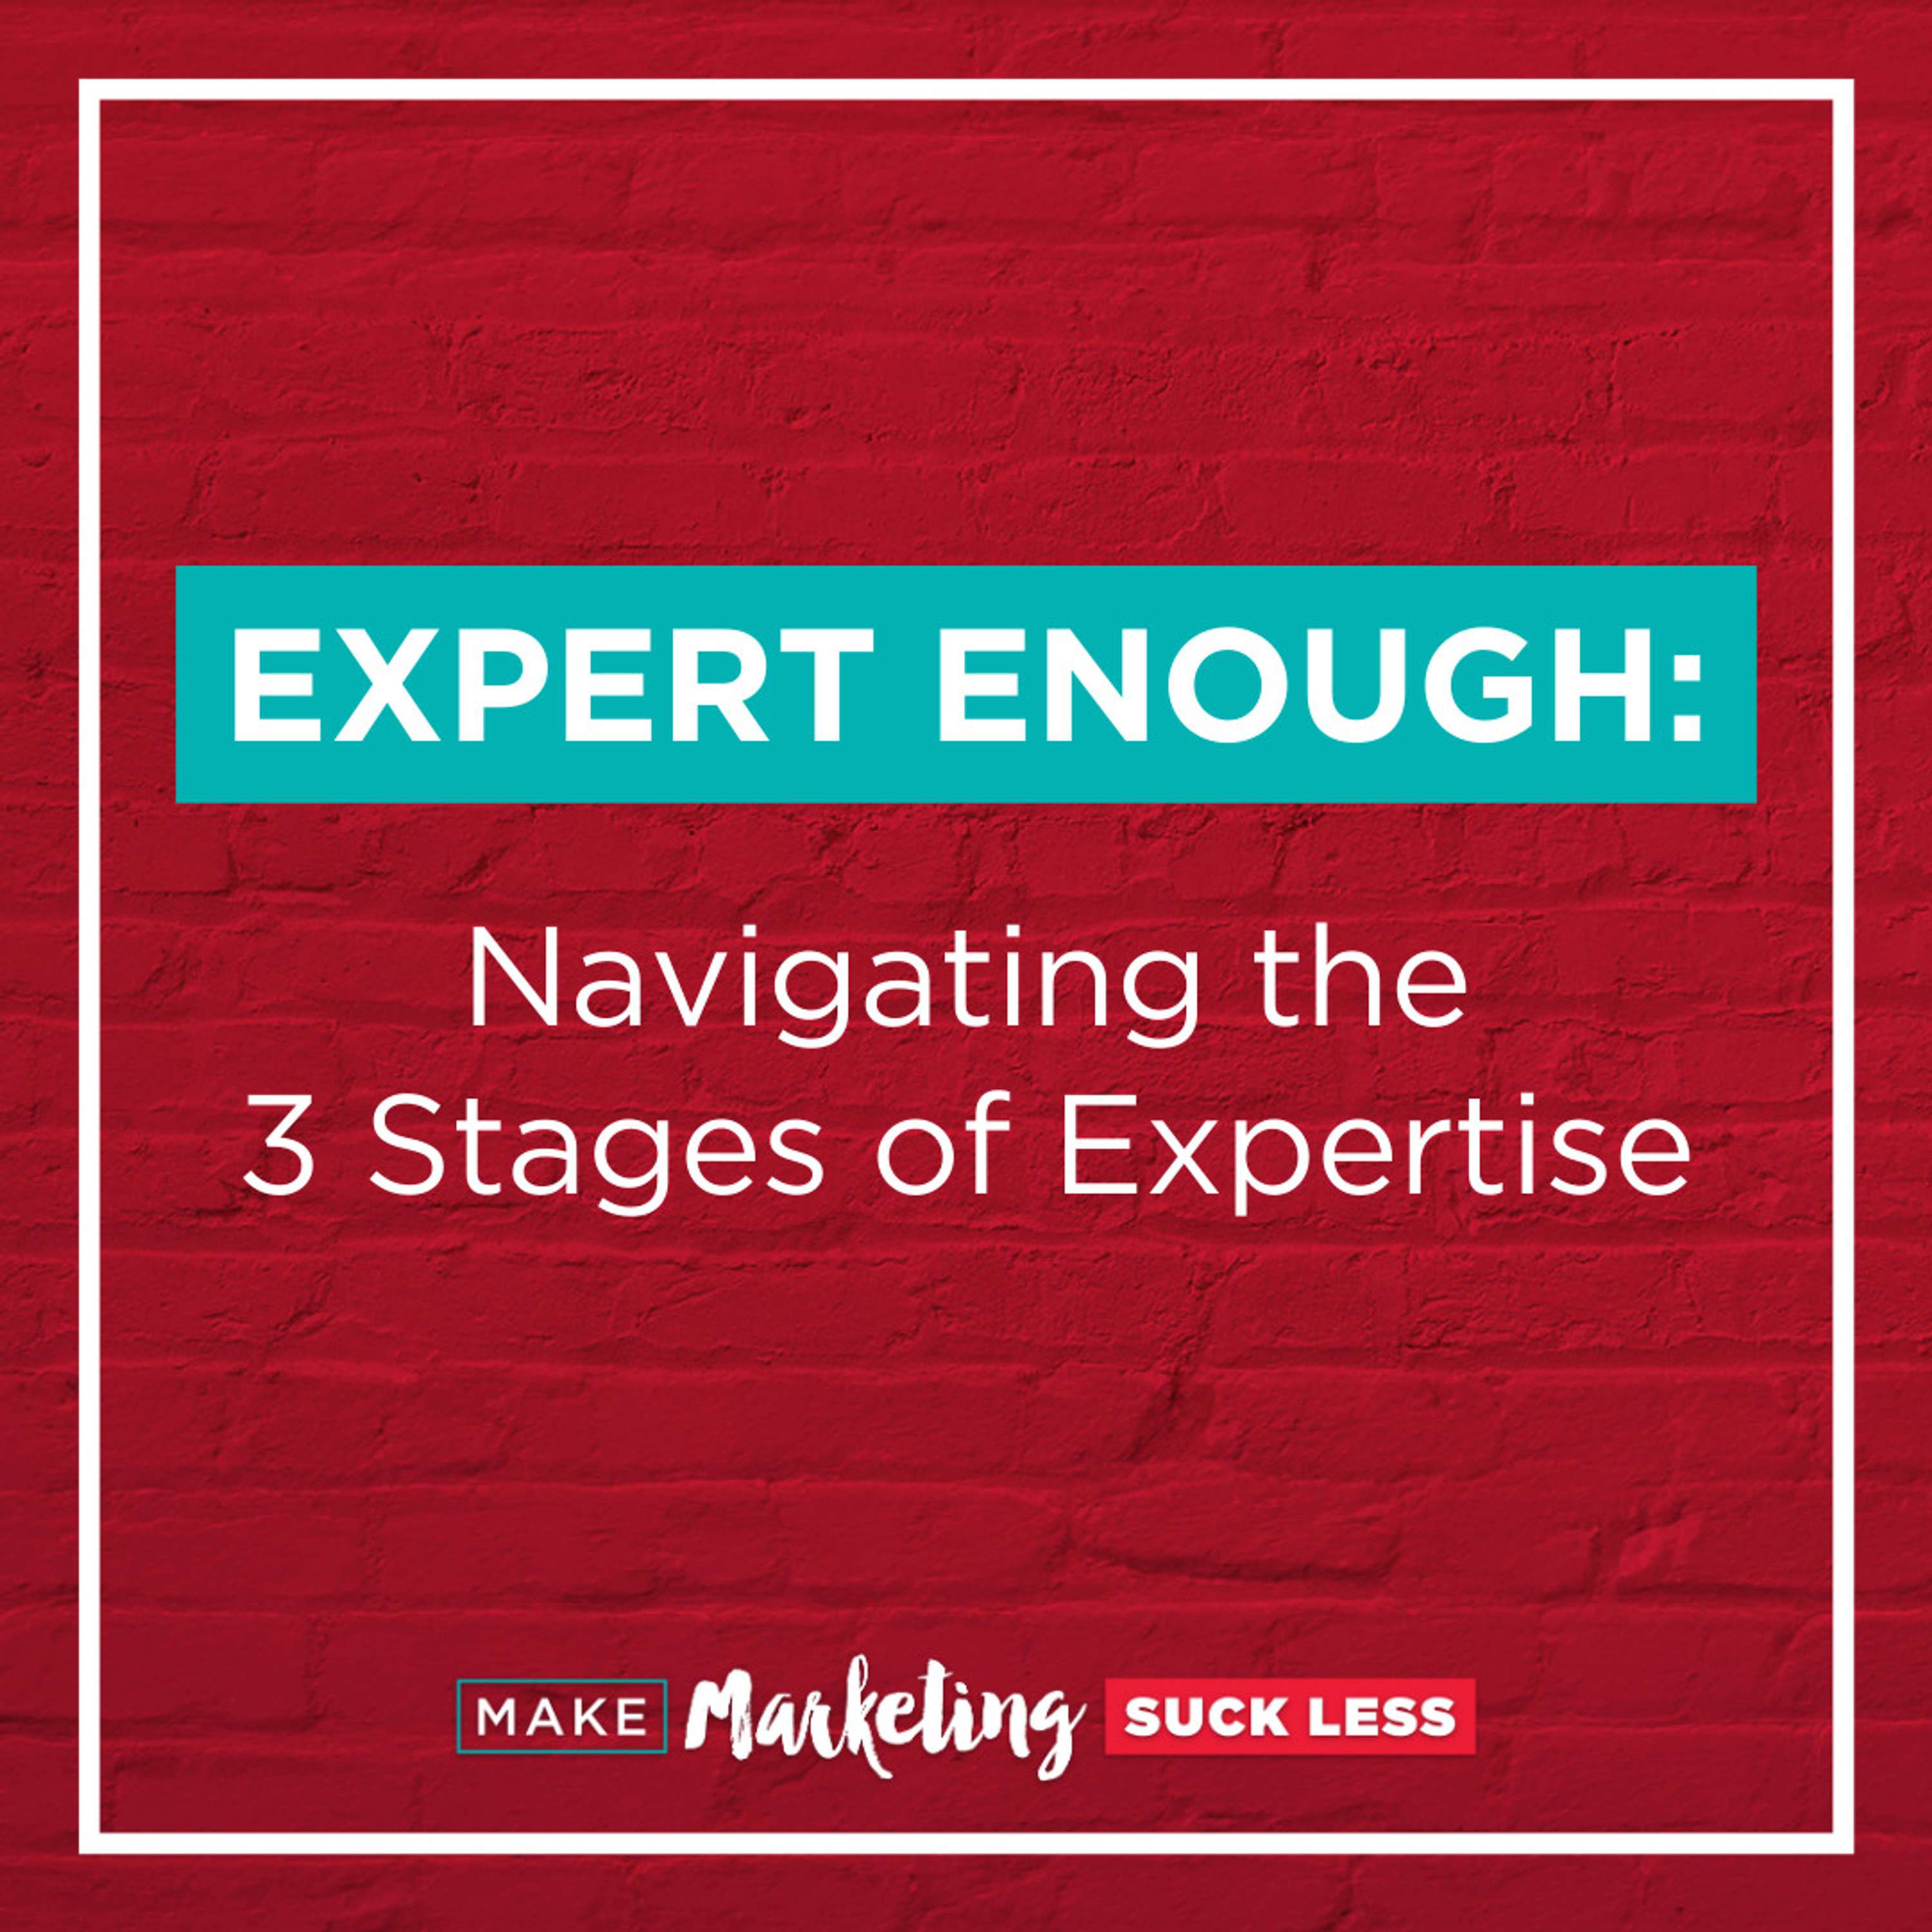 Expert Enough: Navigating the 3 Stages of Expertise